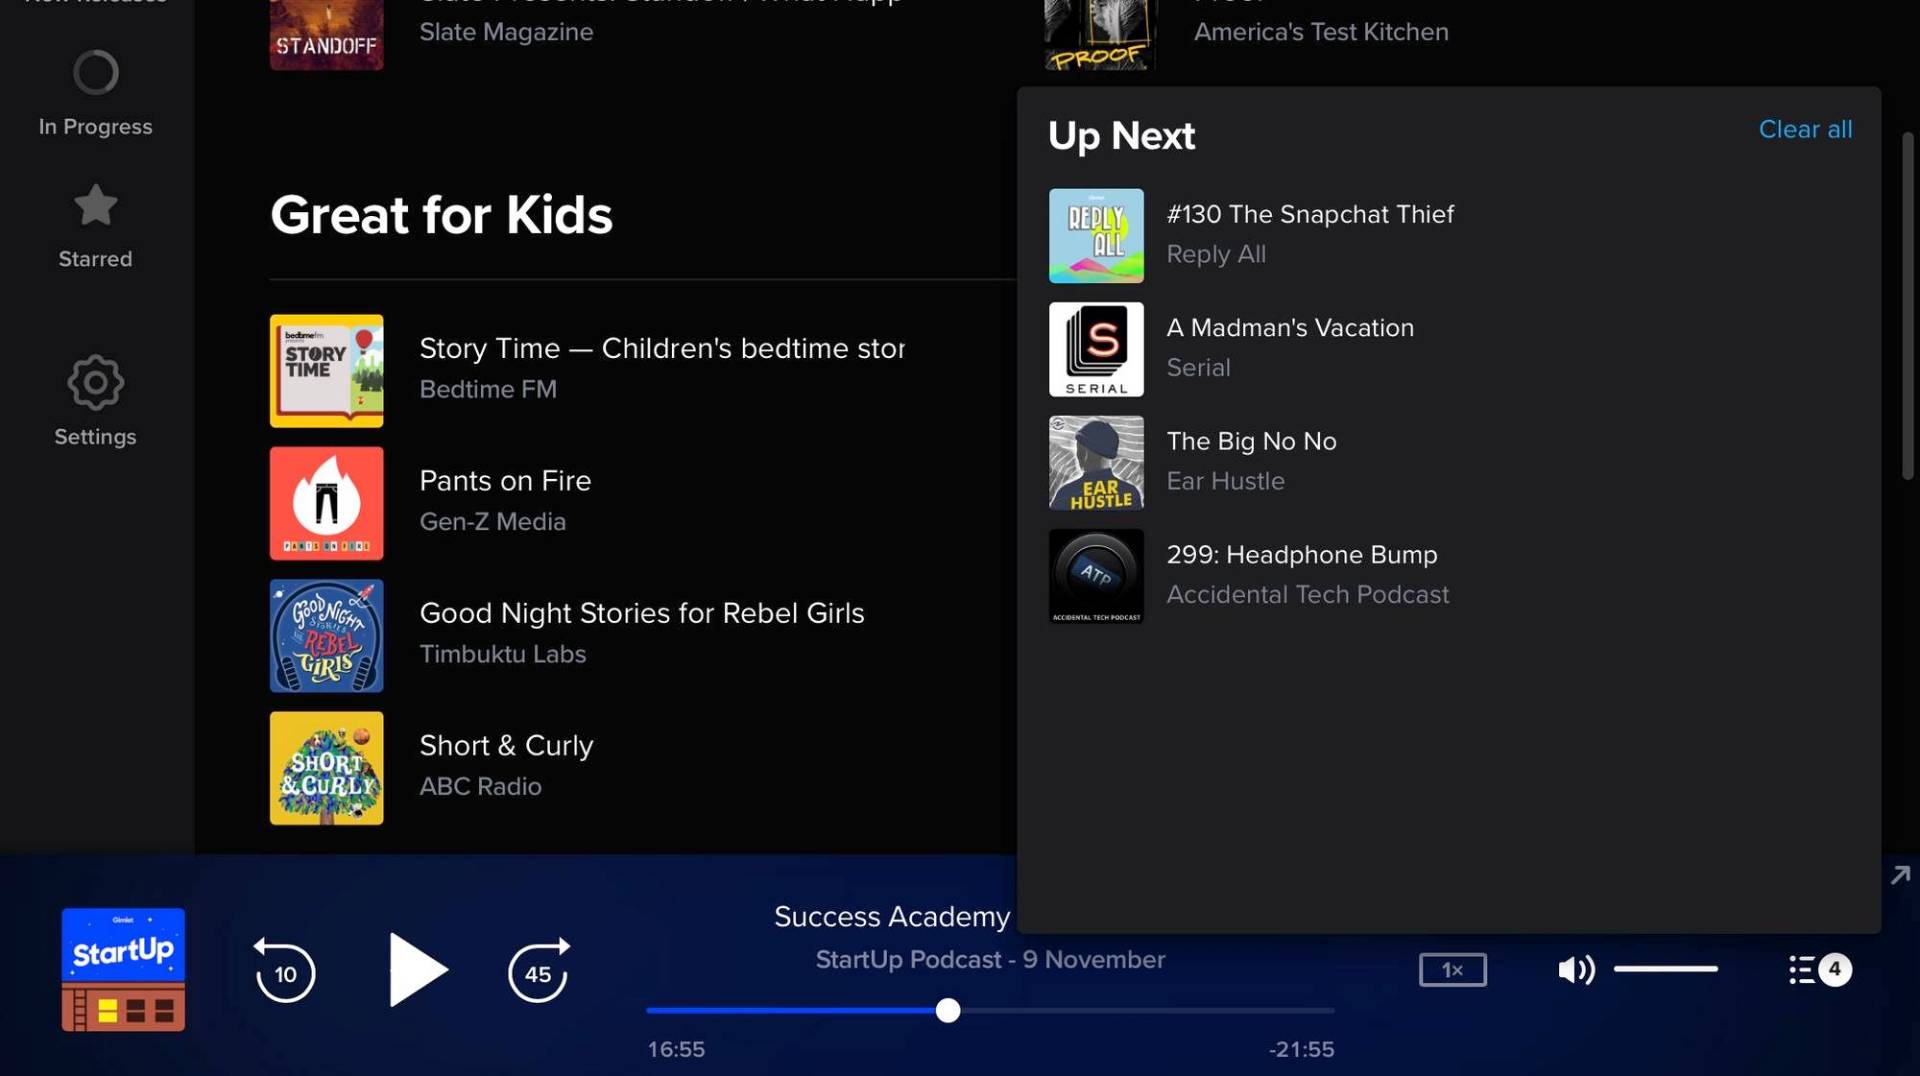 Learn How to Listen to Podcasts on the Pocket Casts App